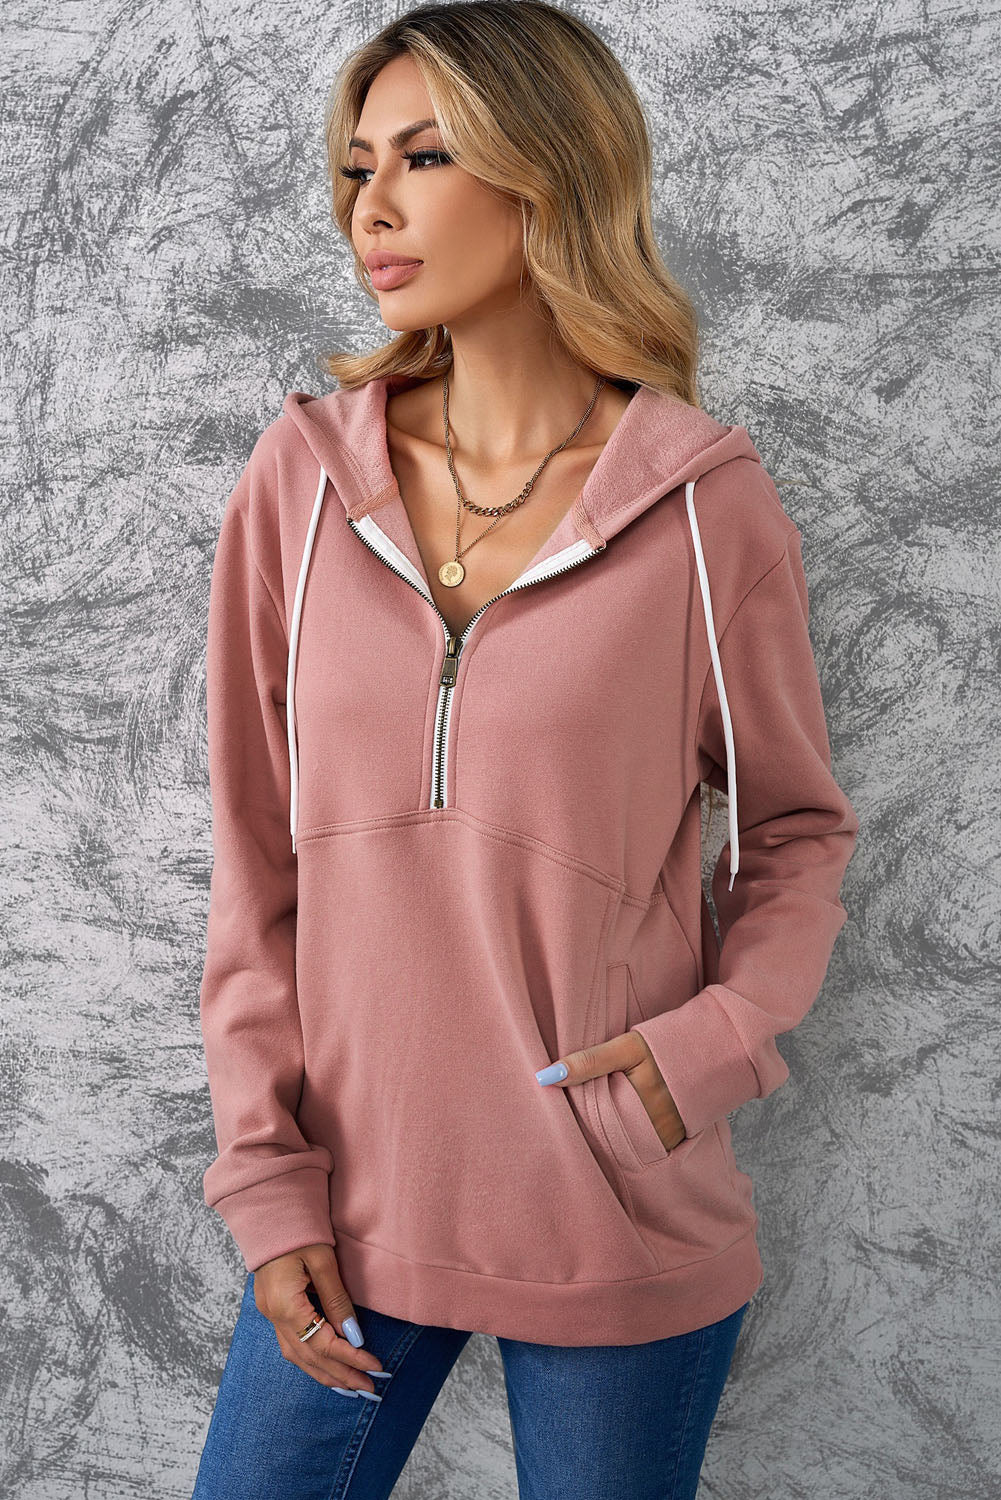 Half-Zip Drawstring Hoodie with Pockets - Pink / S - Women’s Clothing & Accessories - Shirts & Tops - 1 - 2024